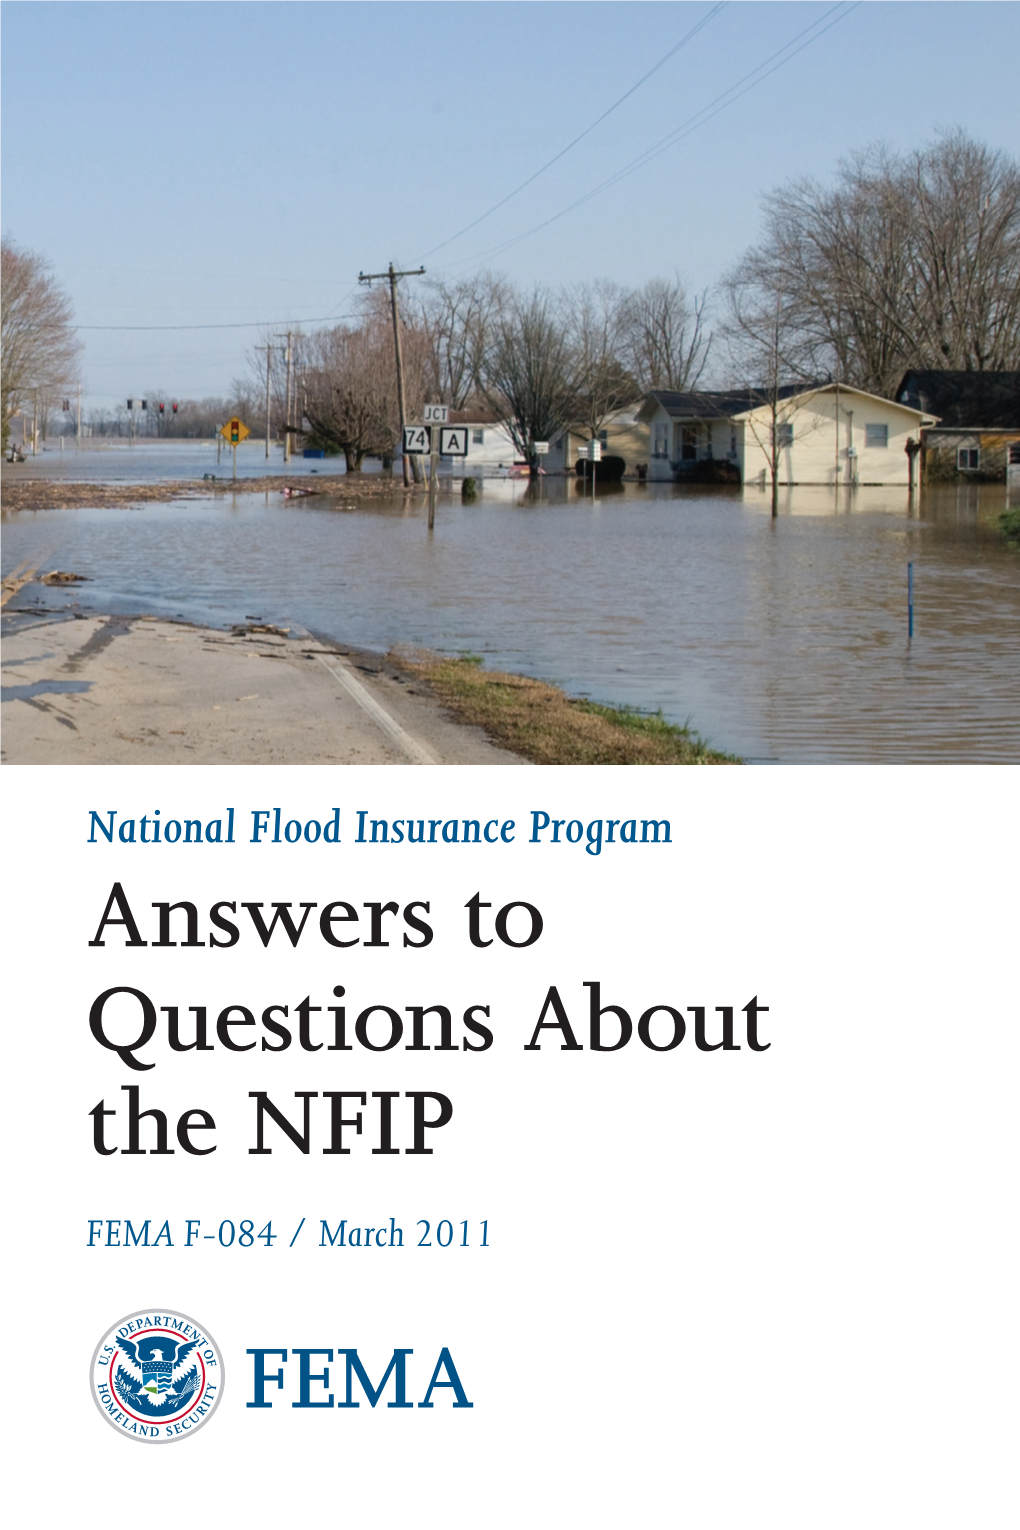 National Flood Insurance Program Answers to Questions About the NFIP FEMA F-084 / March 2011